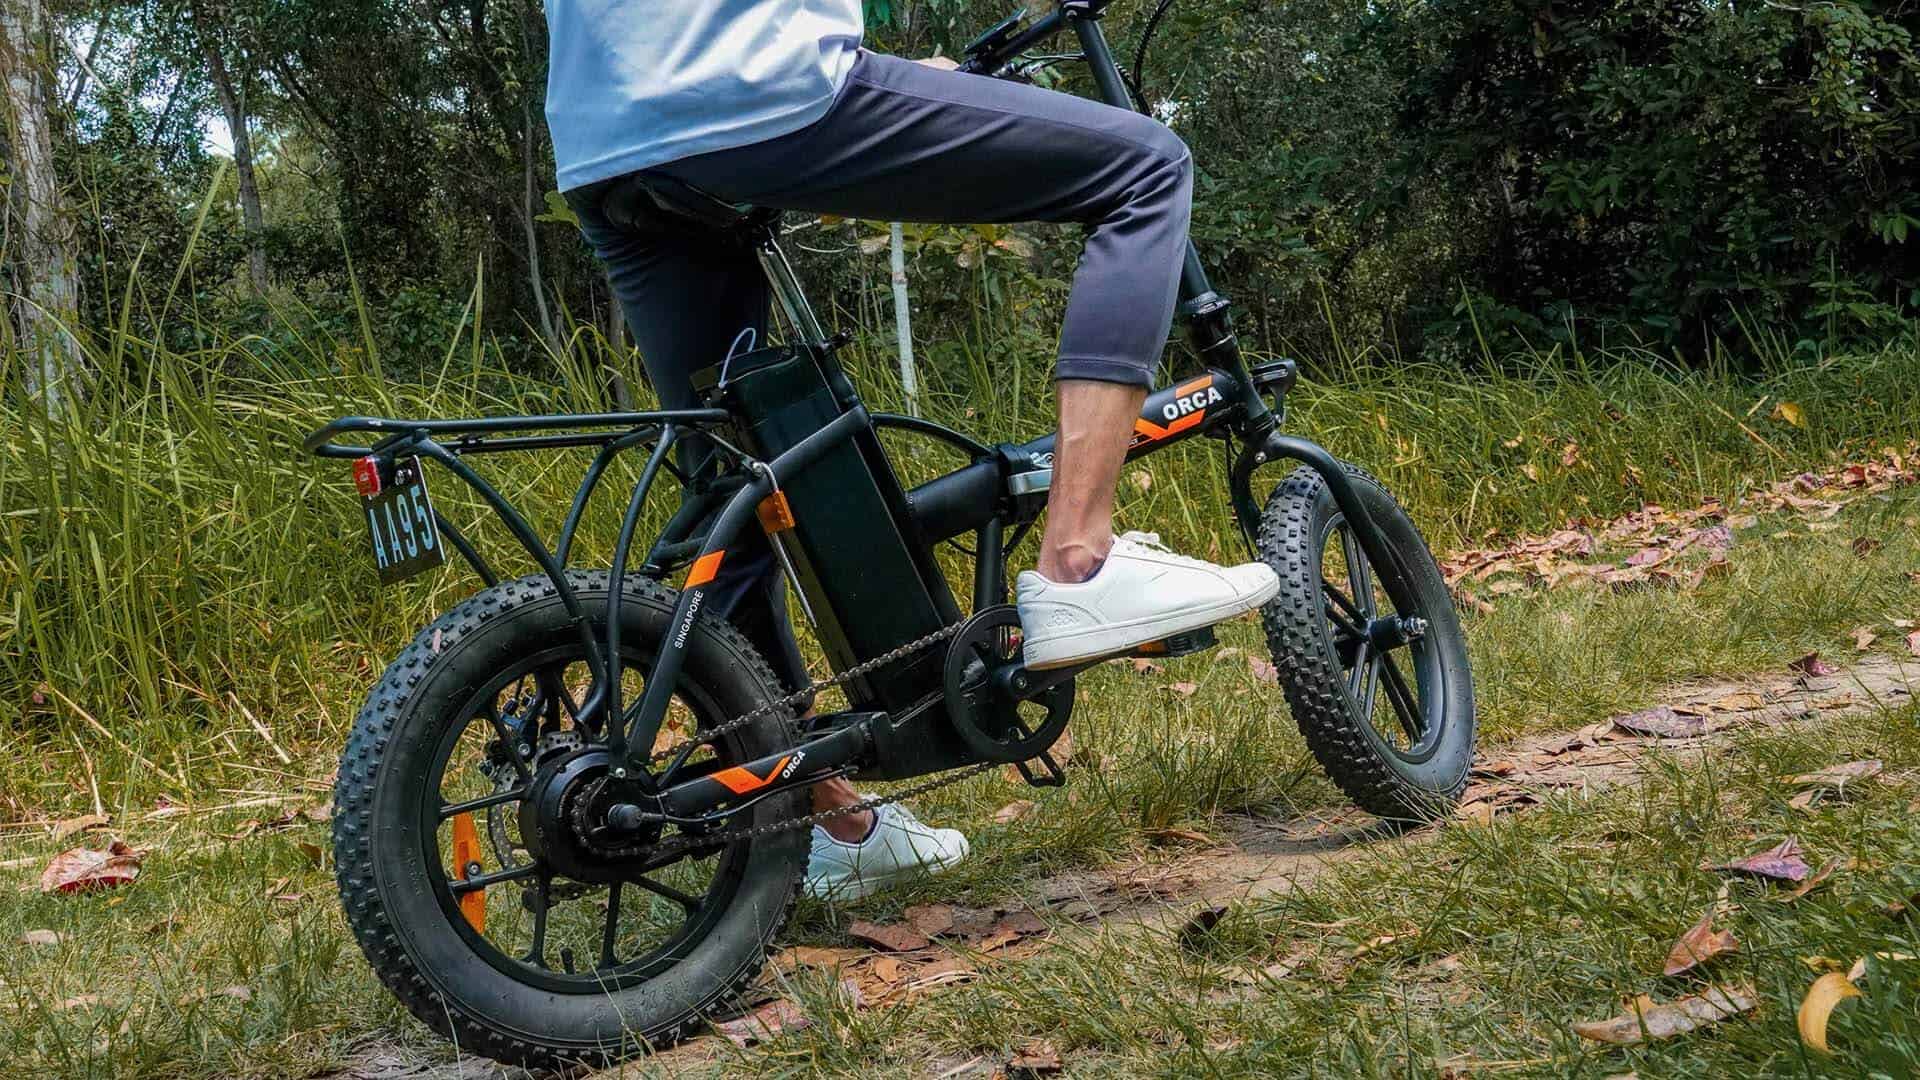 ORCA (BLACK) LTA approved fat tyre ebike at Tampines Eco Green - off terrain V1